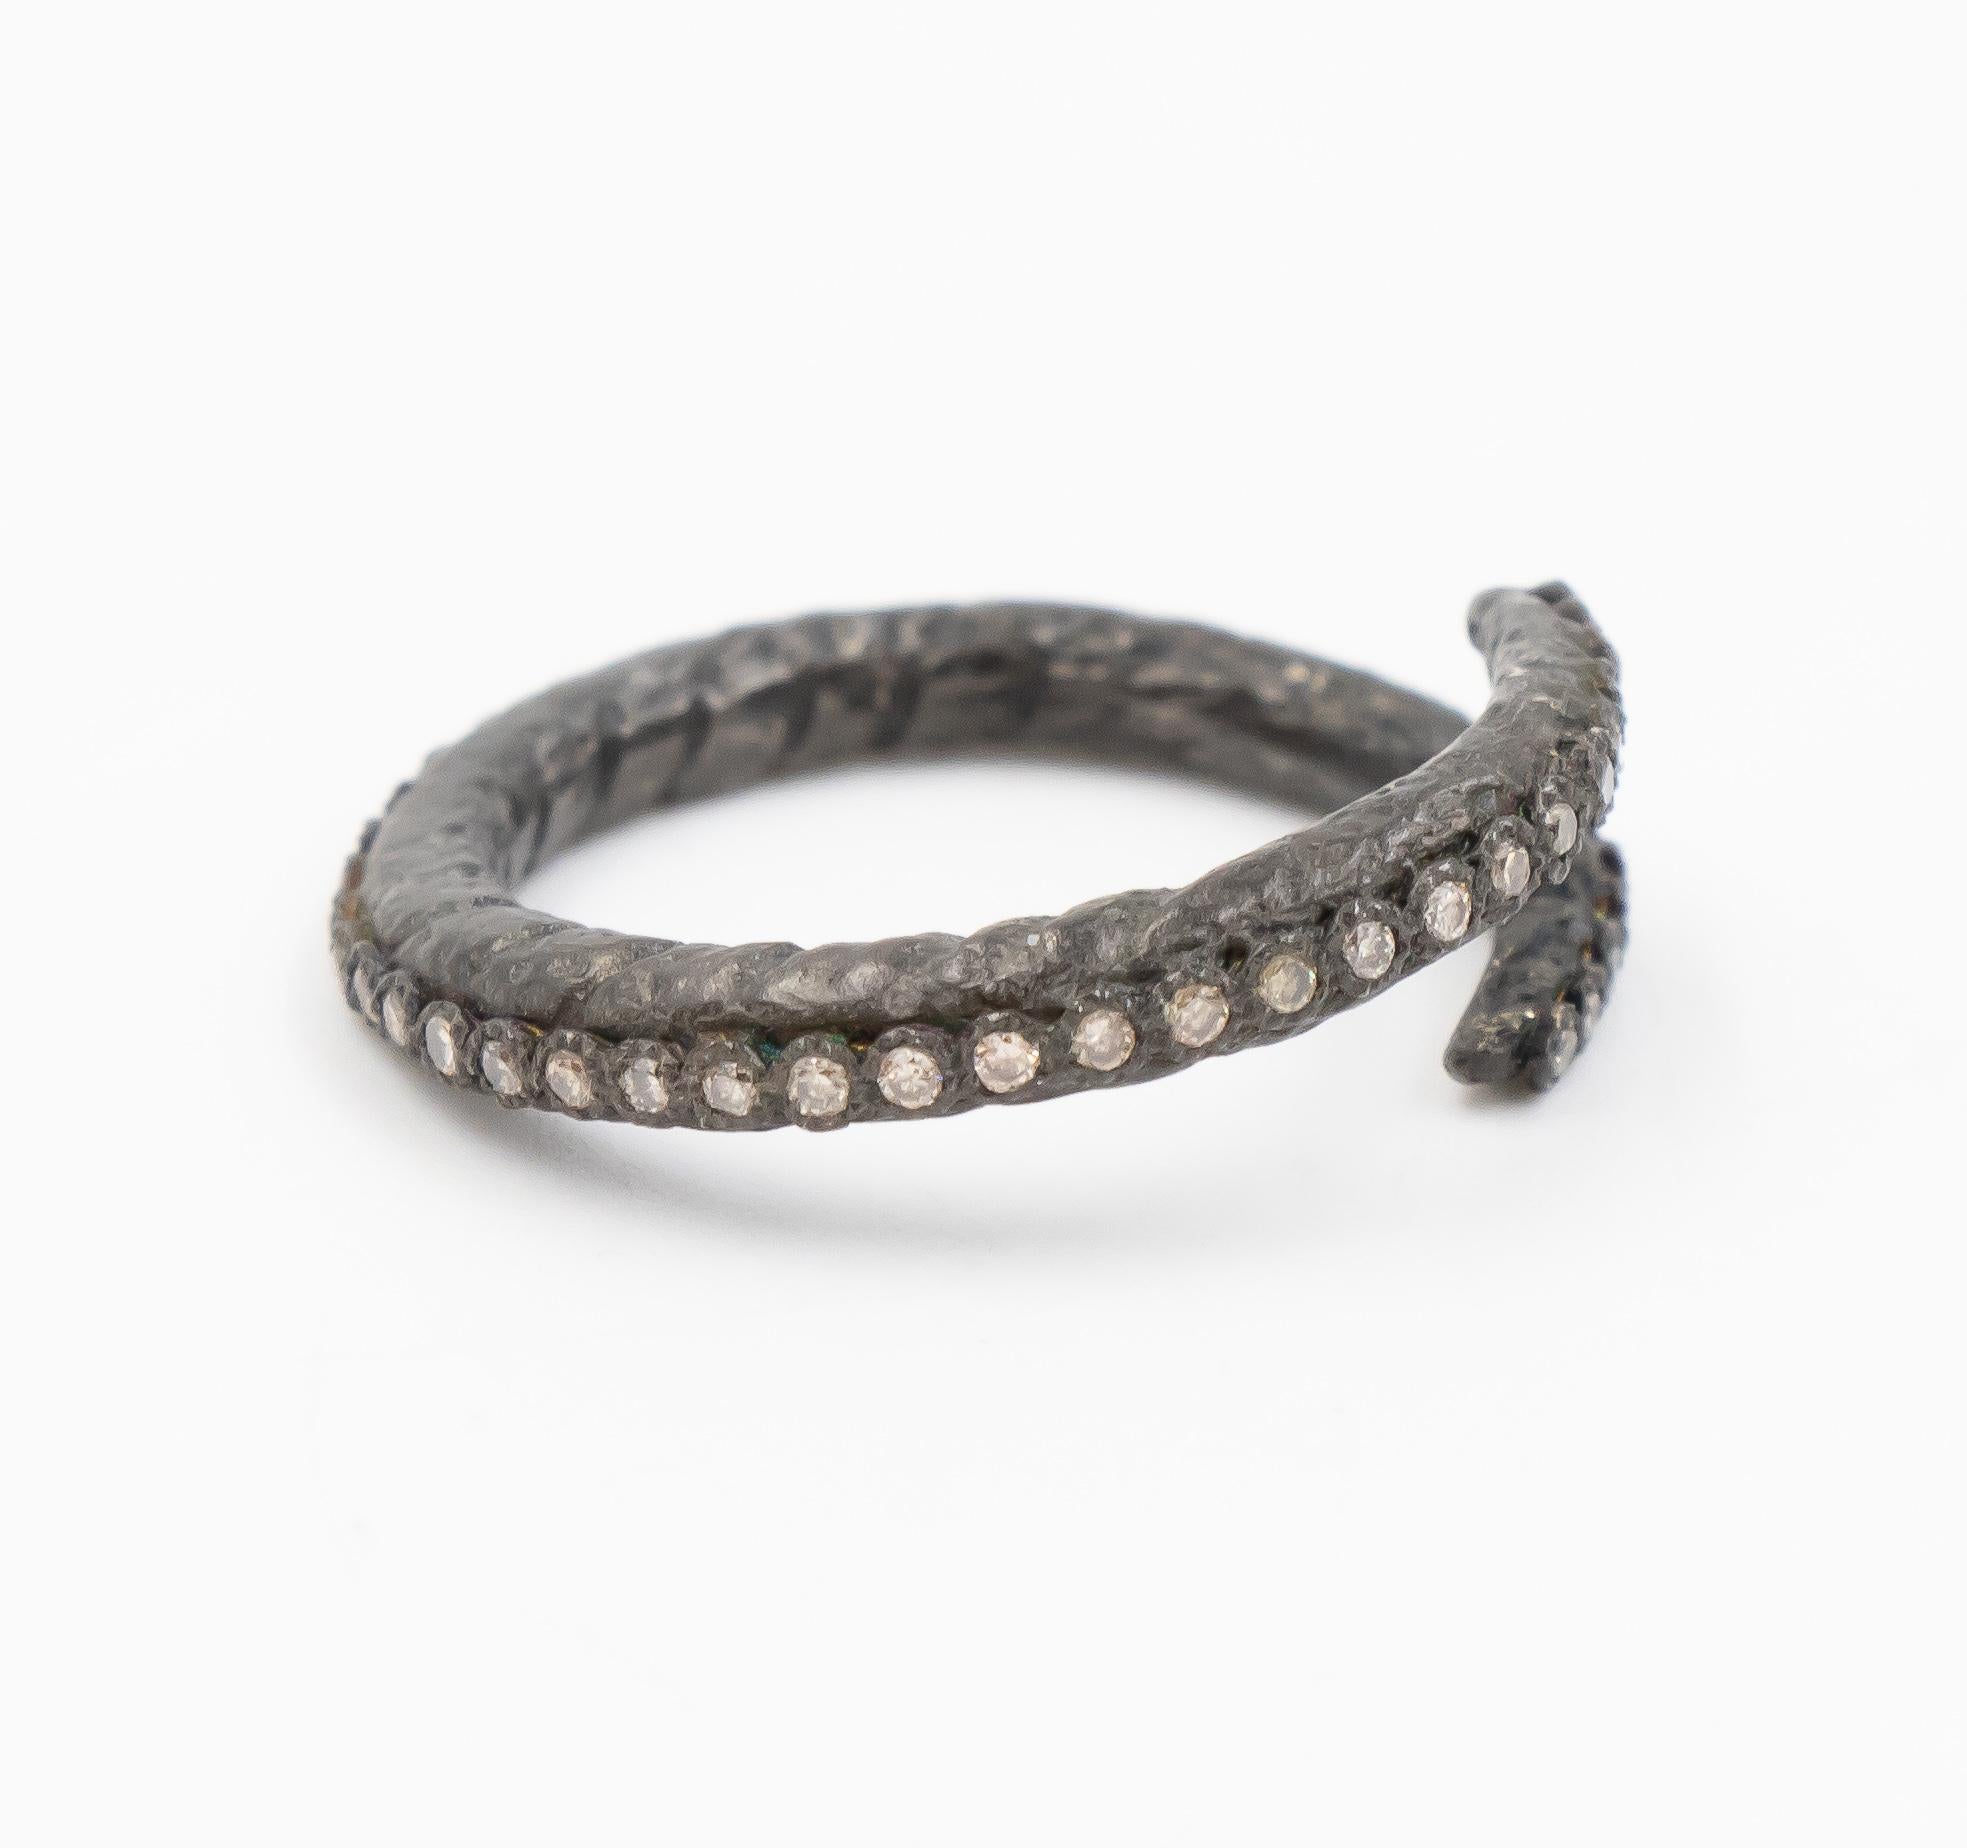 This silver Armenta ring from the Old World collection is a beautiful and fun fashion ring which can be worn for any occasion.  The silver is oxidized to give it a unique style and accented with champagne diamonds.

Internal Measurements: 

Ring